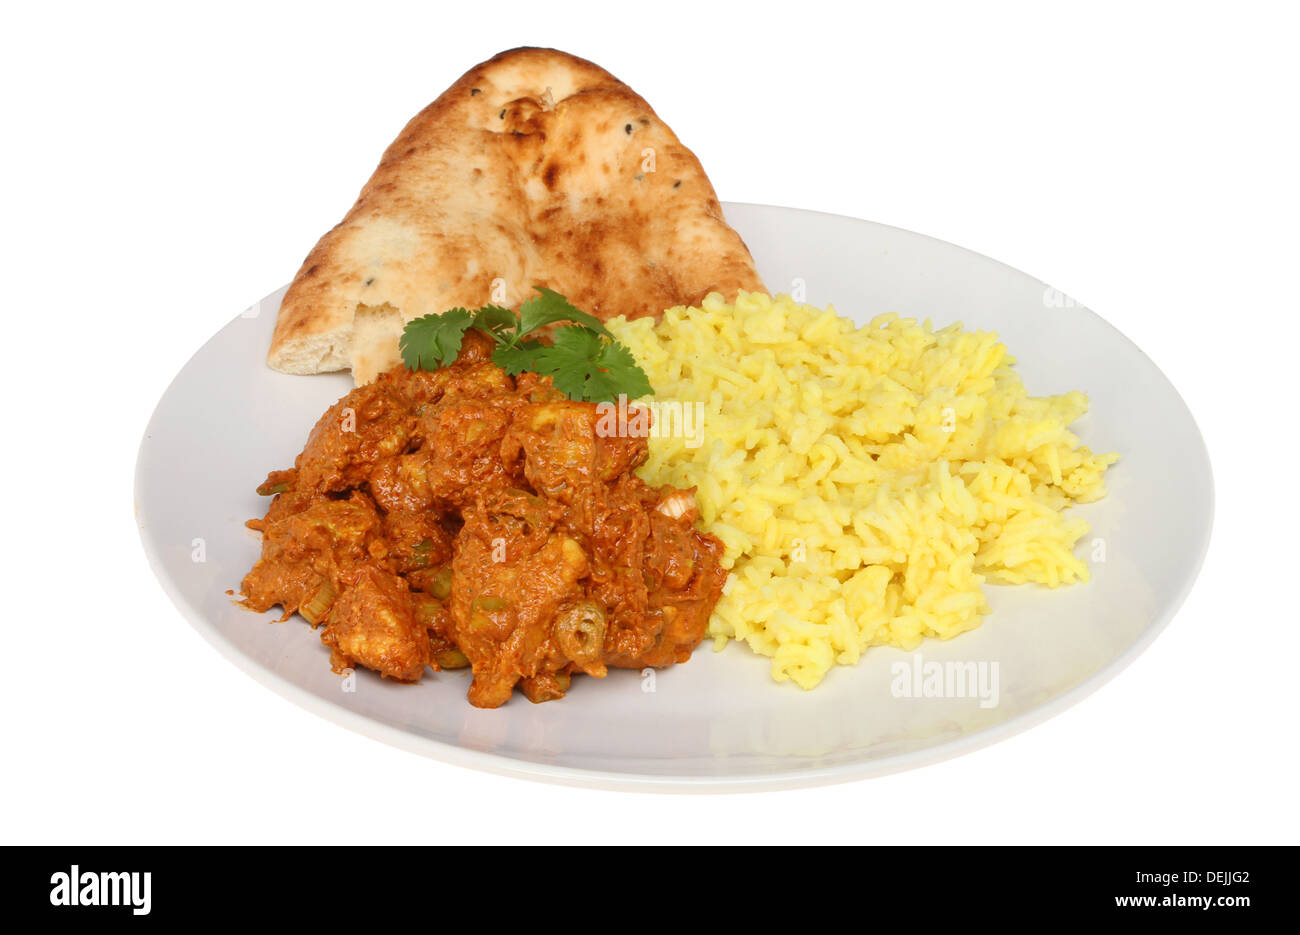 Chicken tikka masala with rice and naan bread on a plate isolated against white Stock Photo